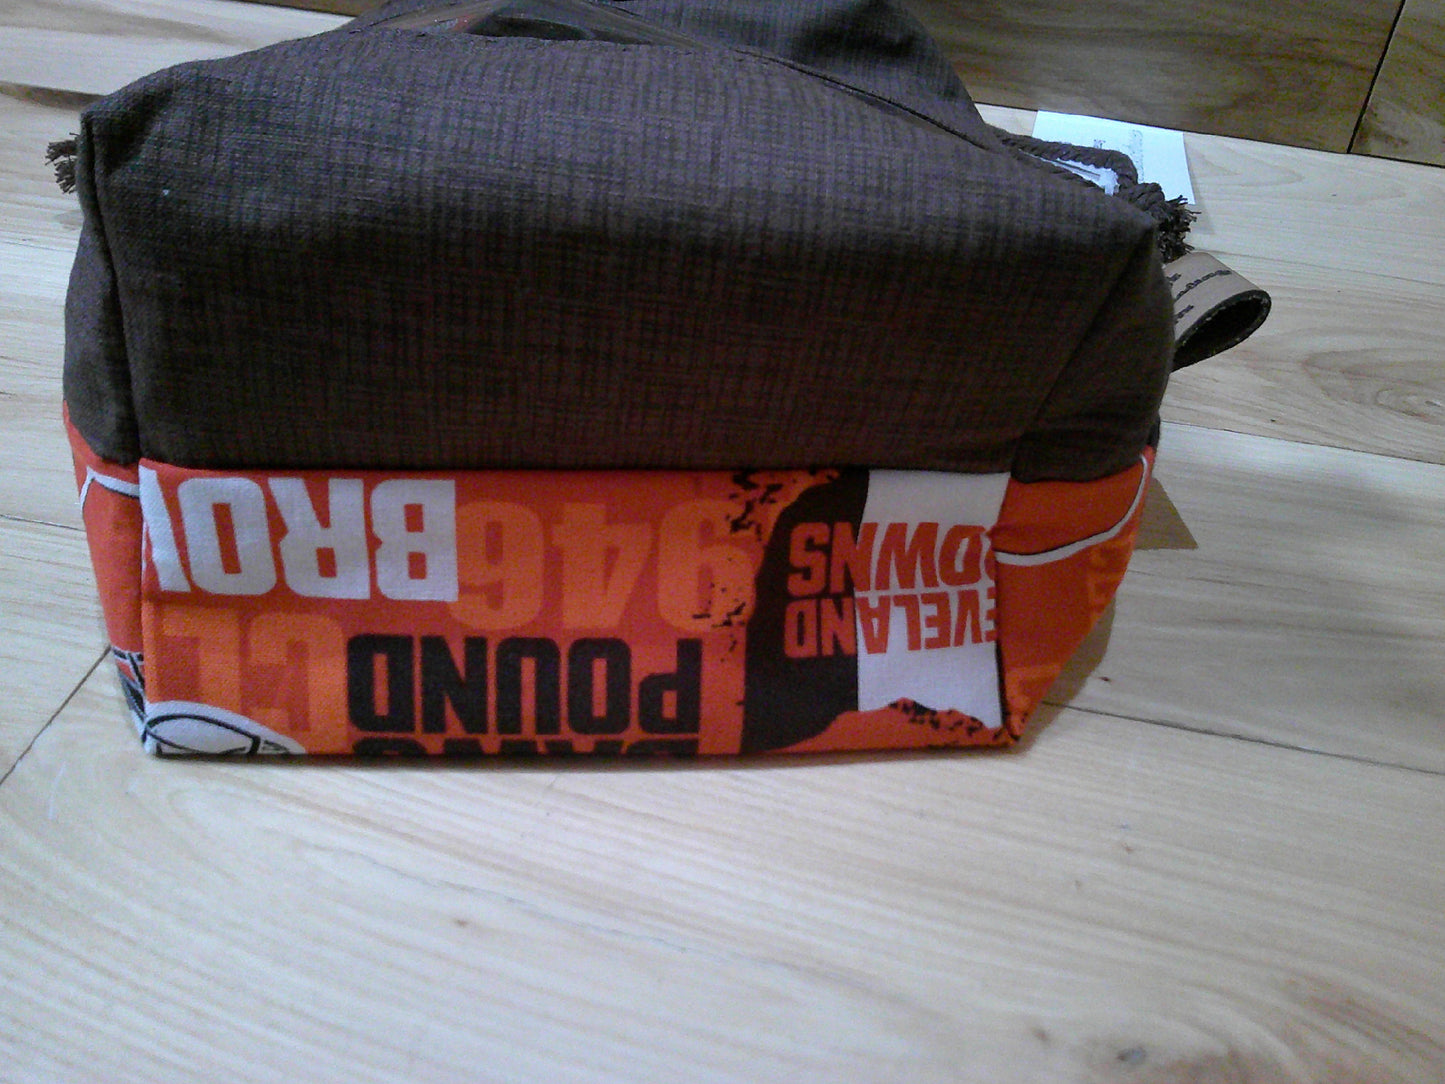 Cleveland Browns ~ project bags